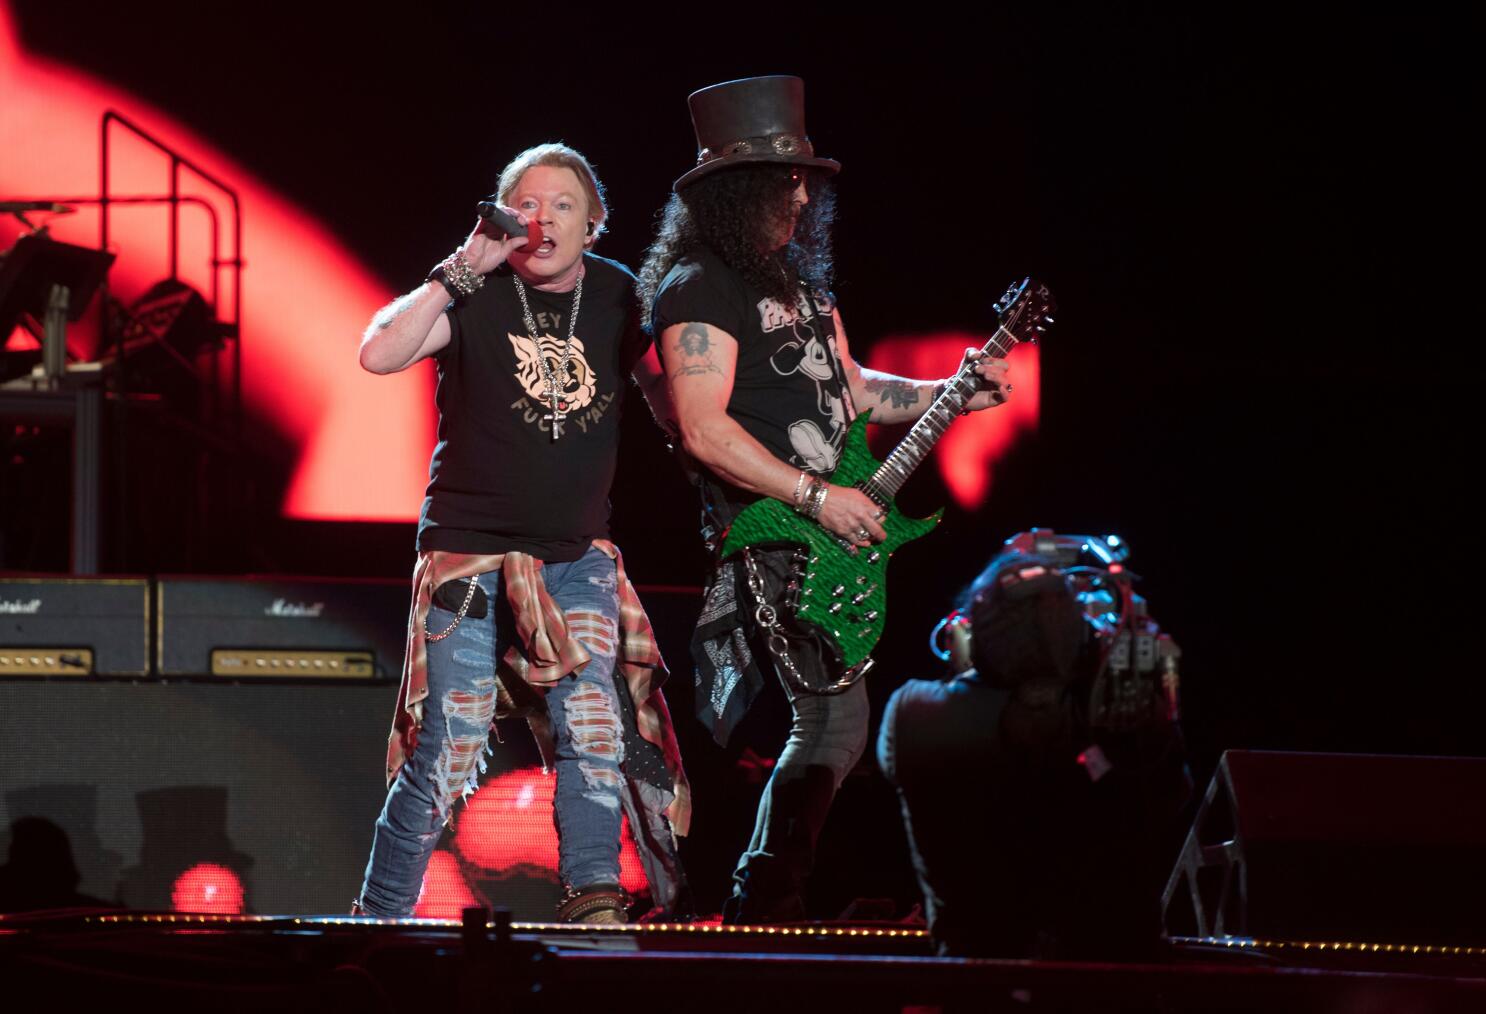 Guns N' Roses announce 2023 world tour, including San Diego Snapdragon  Stadium show; here are all the dates - The San Diego Union-Tribune